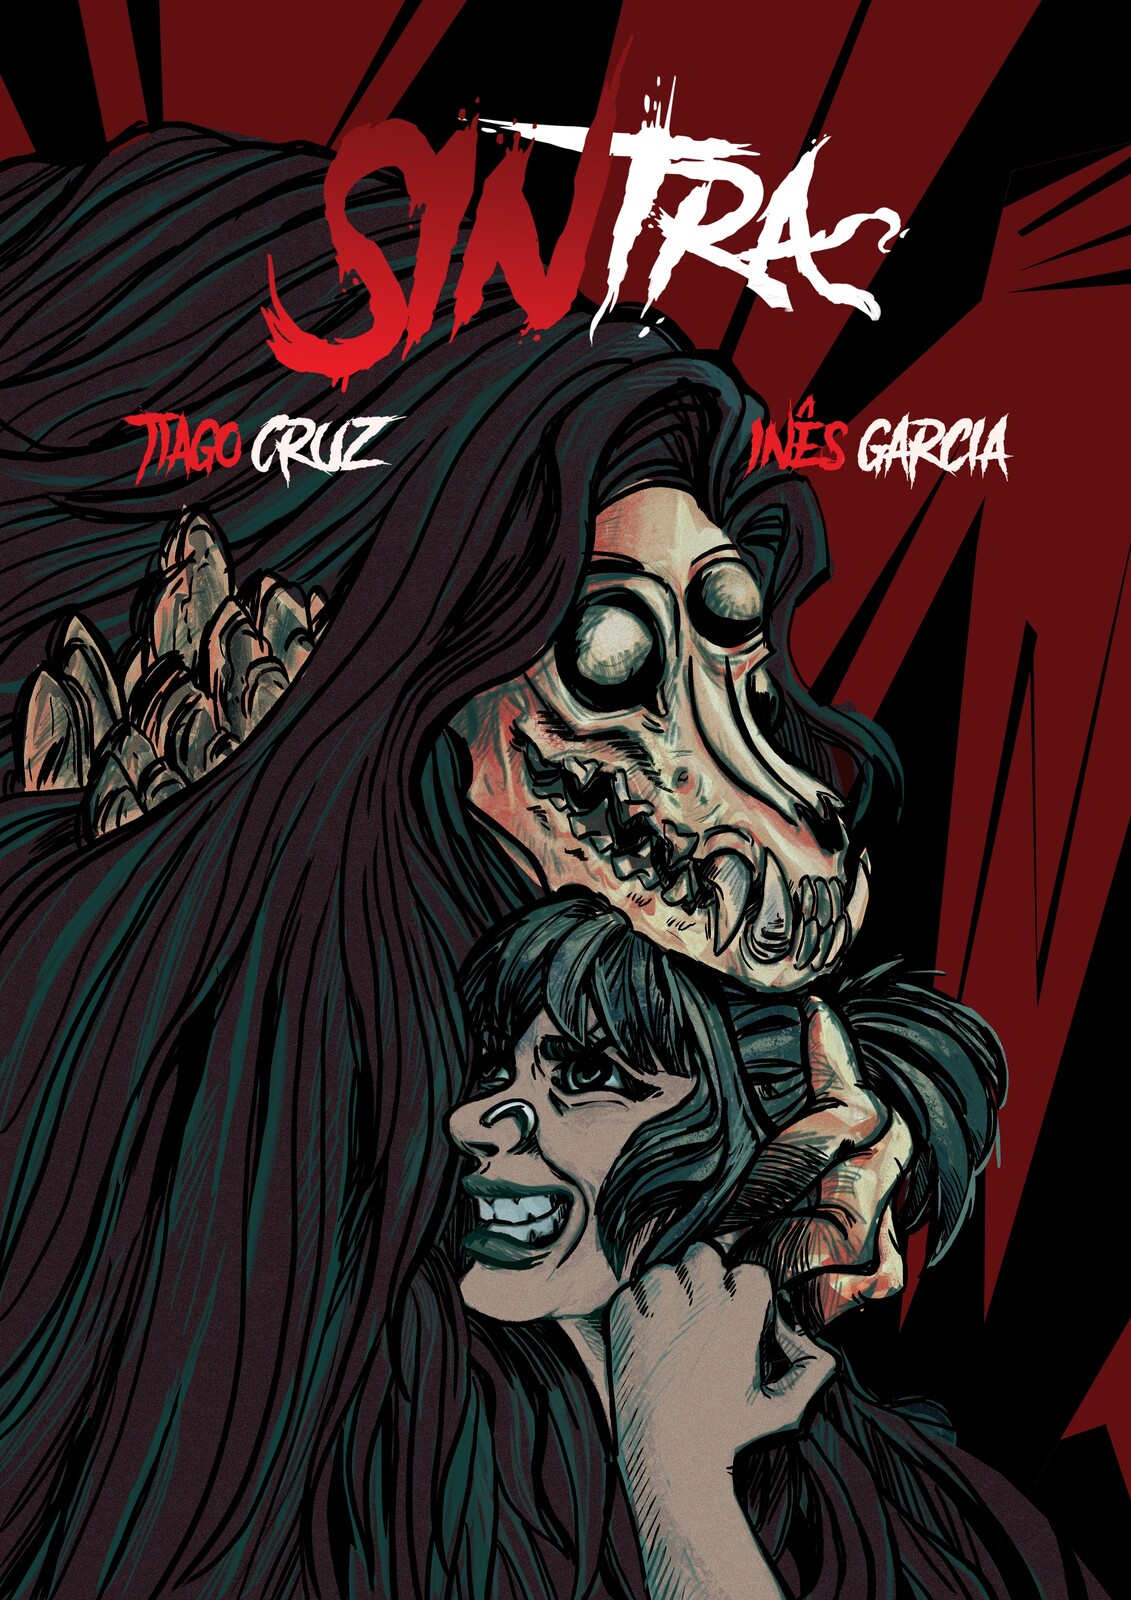 Chosen cover for the second edition of the comic book "SINtra"